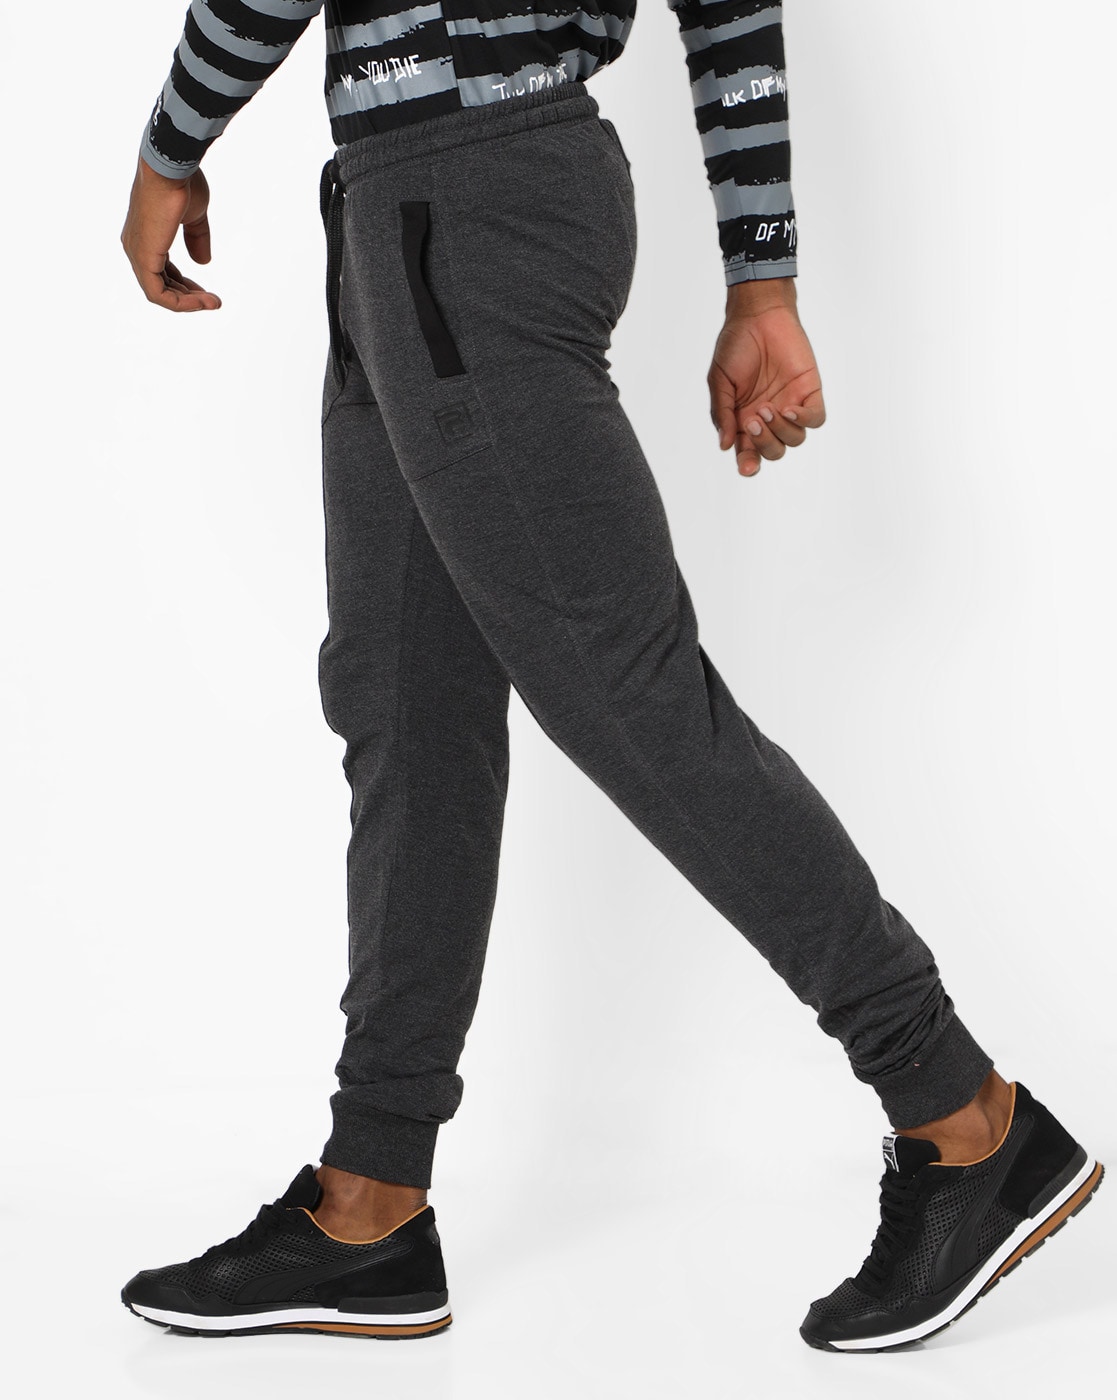 Trousers with skinny legs | Large selection of discounted fashion |  Booztlet.com